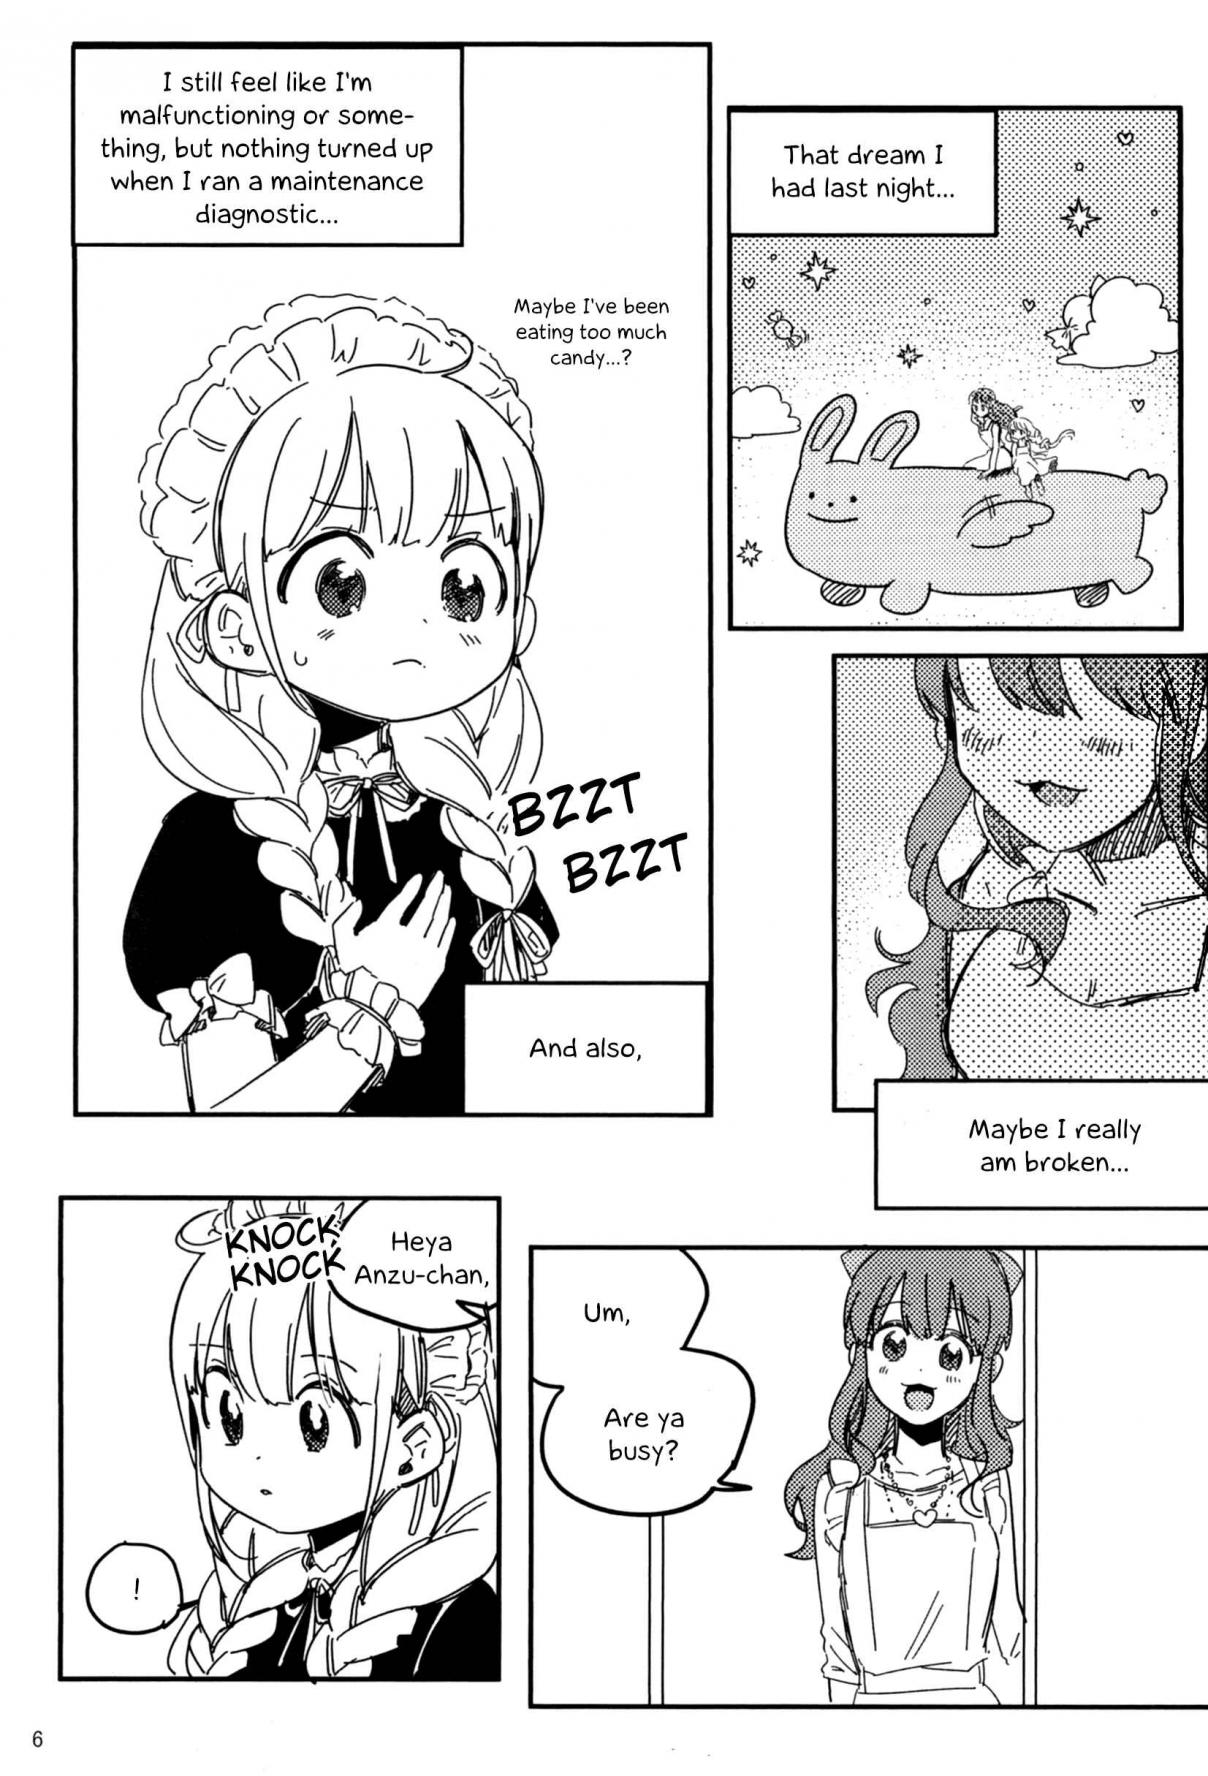 THE iDOLM@STER Your Melody, My Melody (Doujinshi) Oneshot